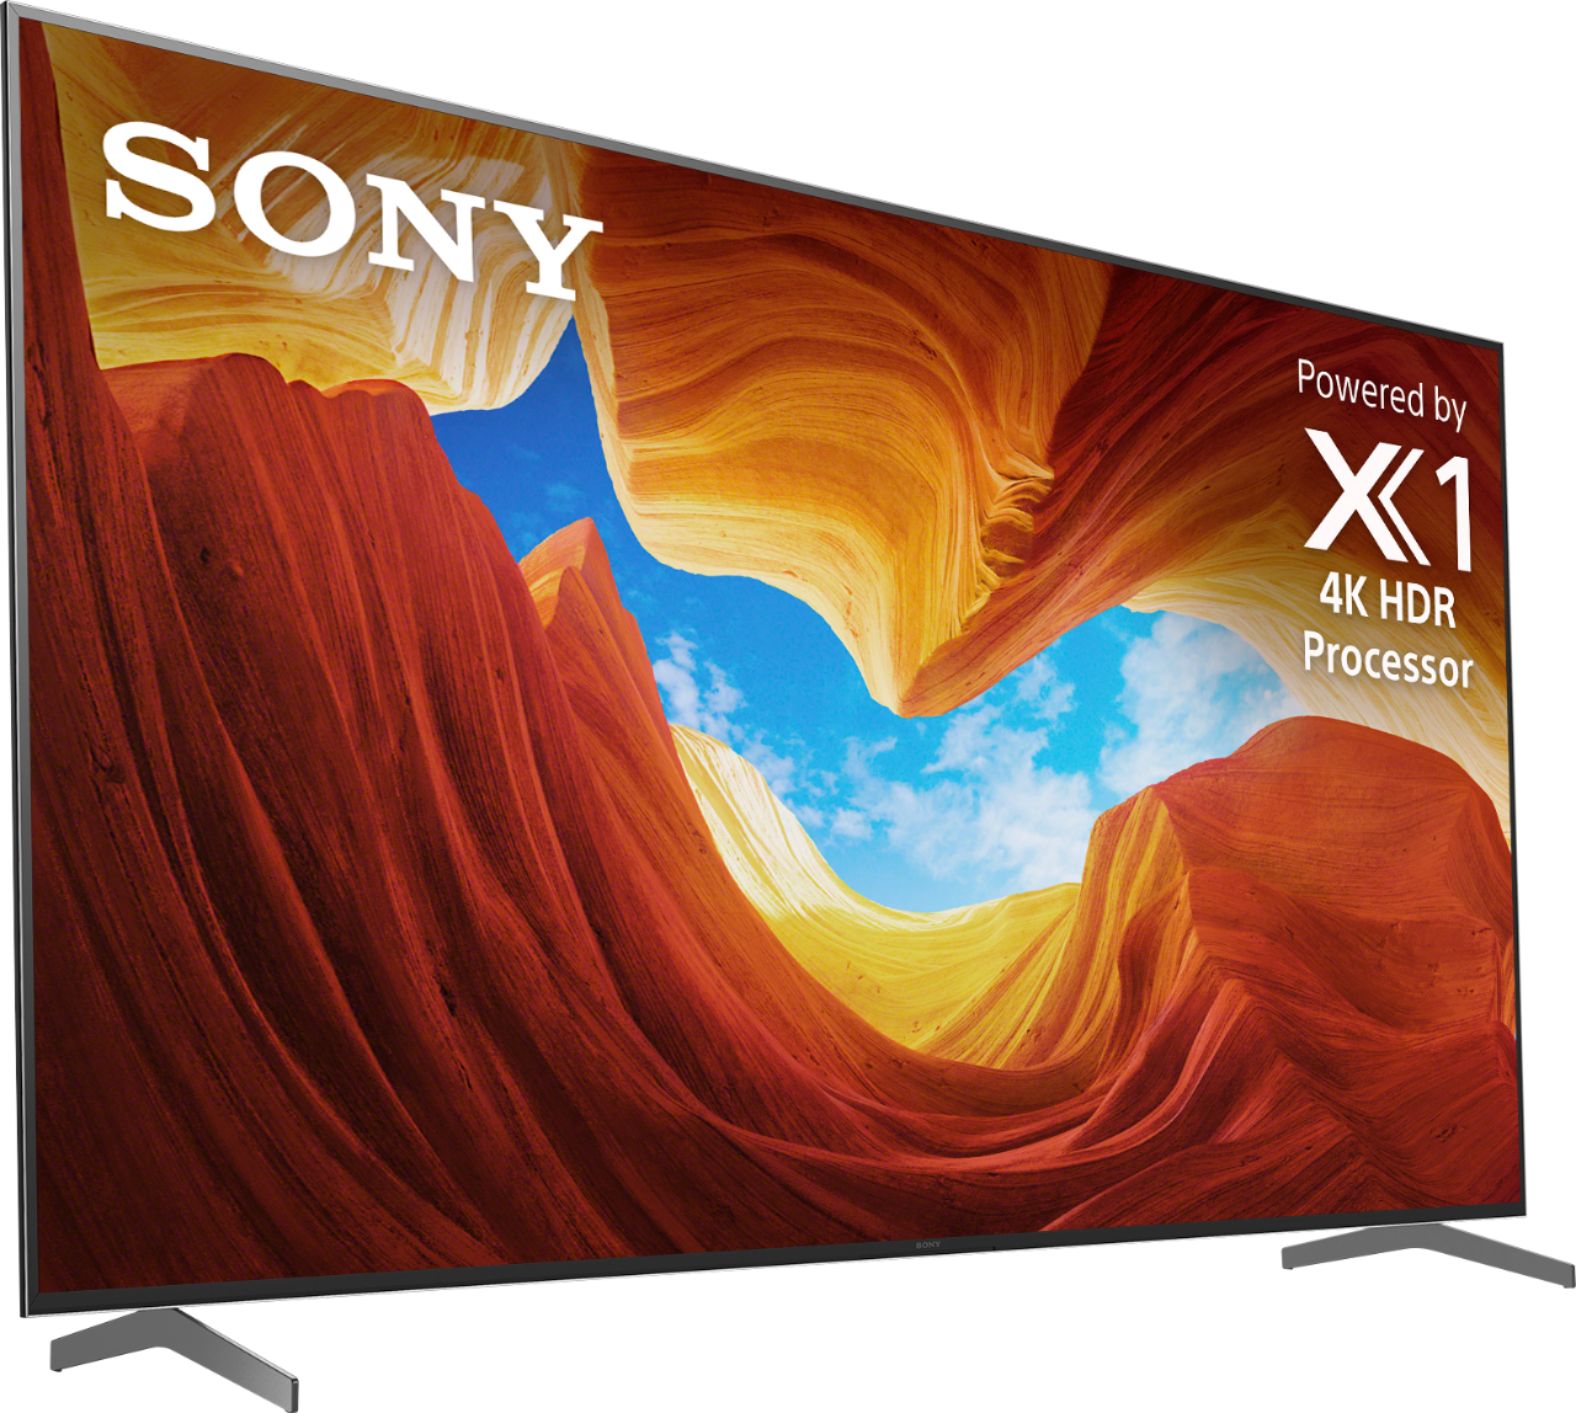 Angle View: Sony - 85" ClassX900H Series LED 4K UHD Smart Android TV